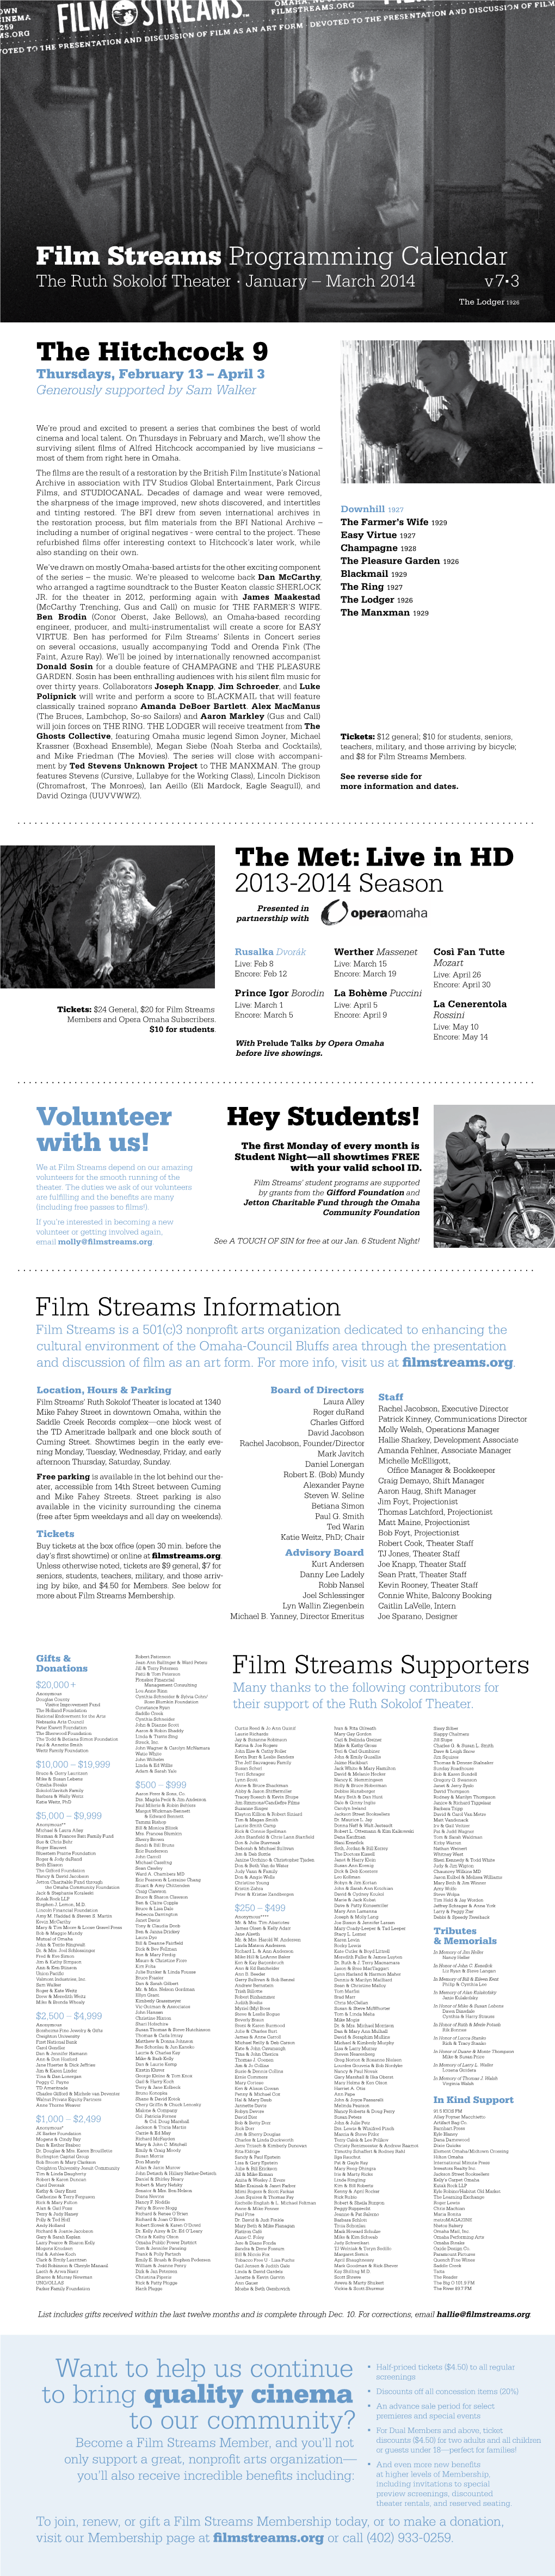 Film Streams Programming Calendar Film Streams Supporters Want to Help Us Continue to Bring Quality Cinema to Our Community?